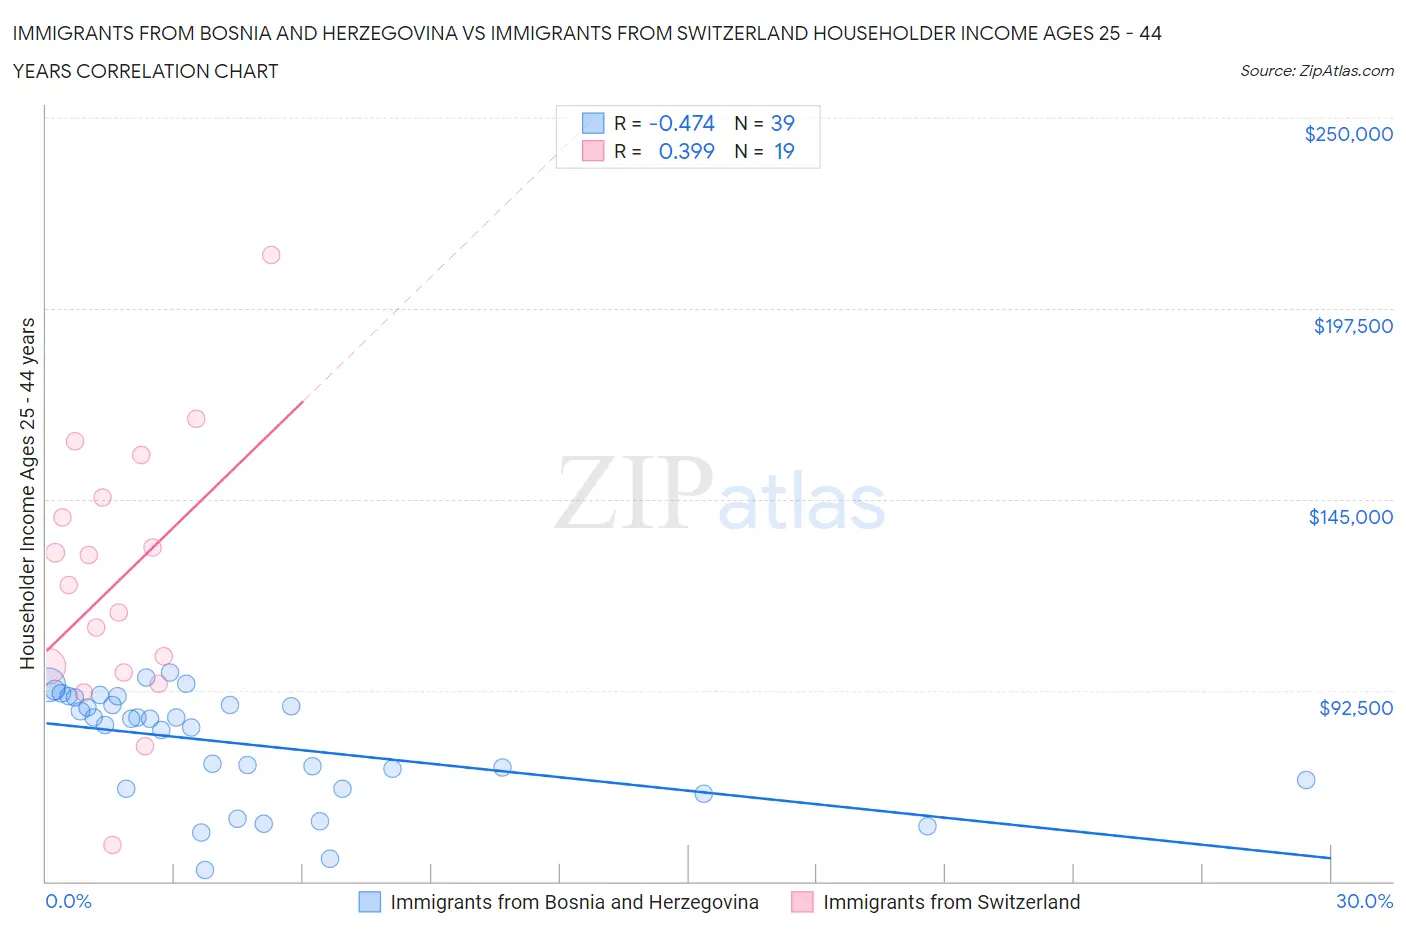 Immigrants from Bosnia and Herzegovina vs Immigrants from Switzerland Householder Income Ages 25 - 44 years